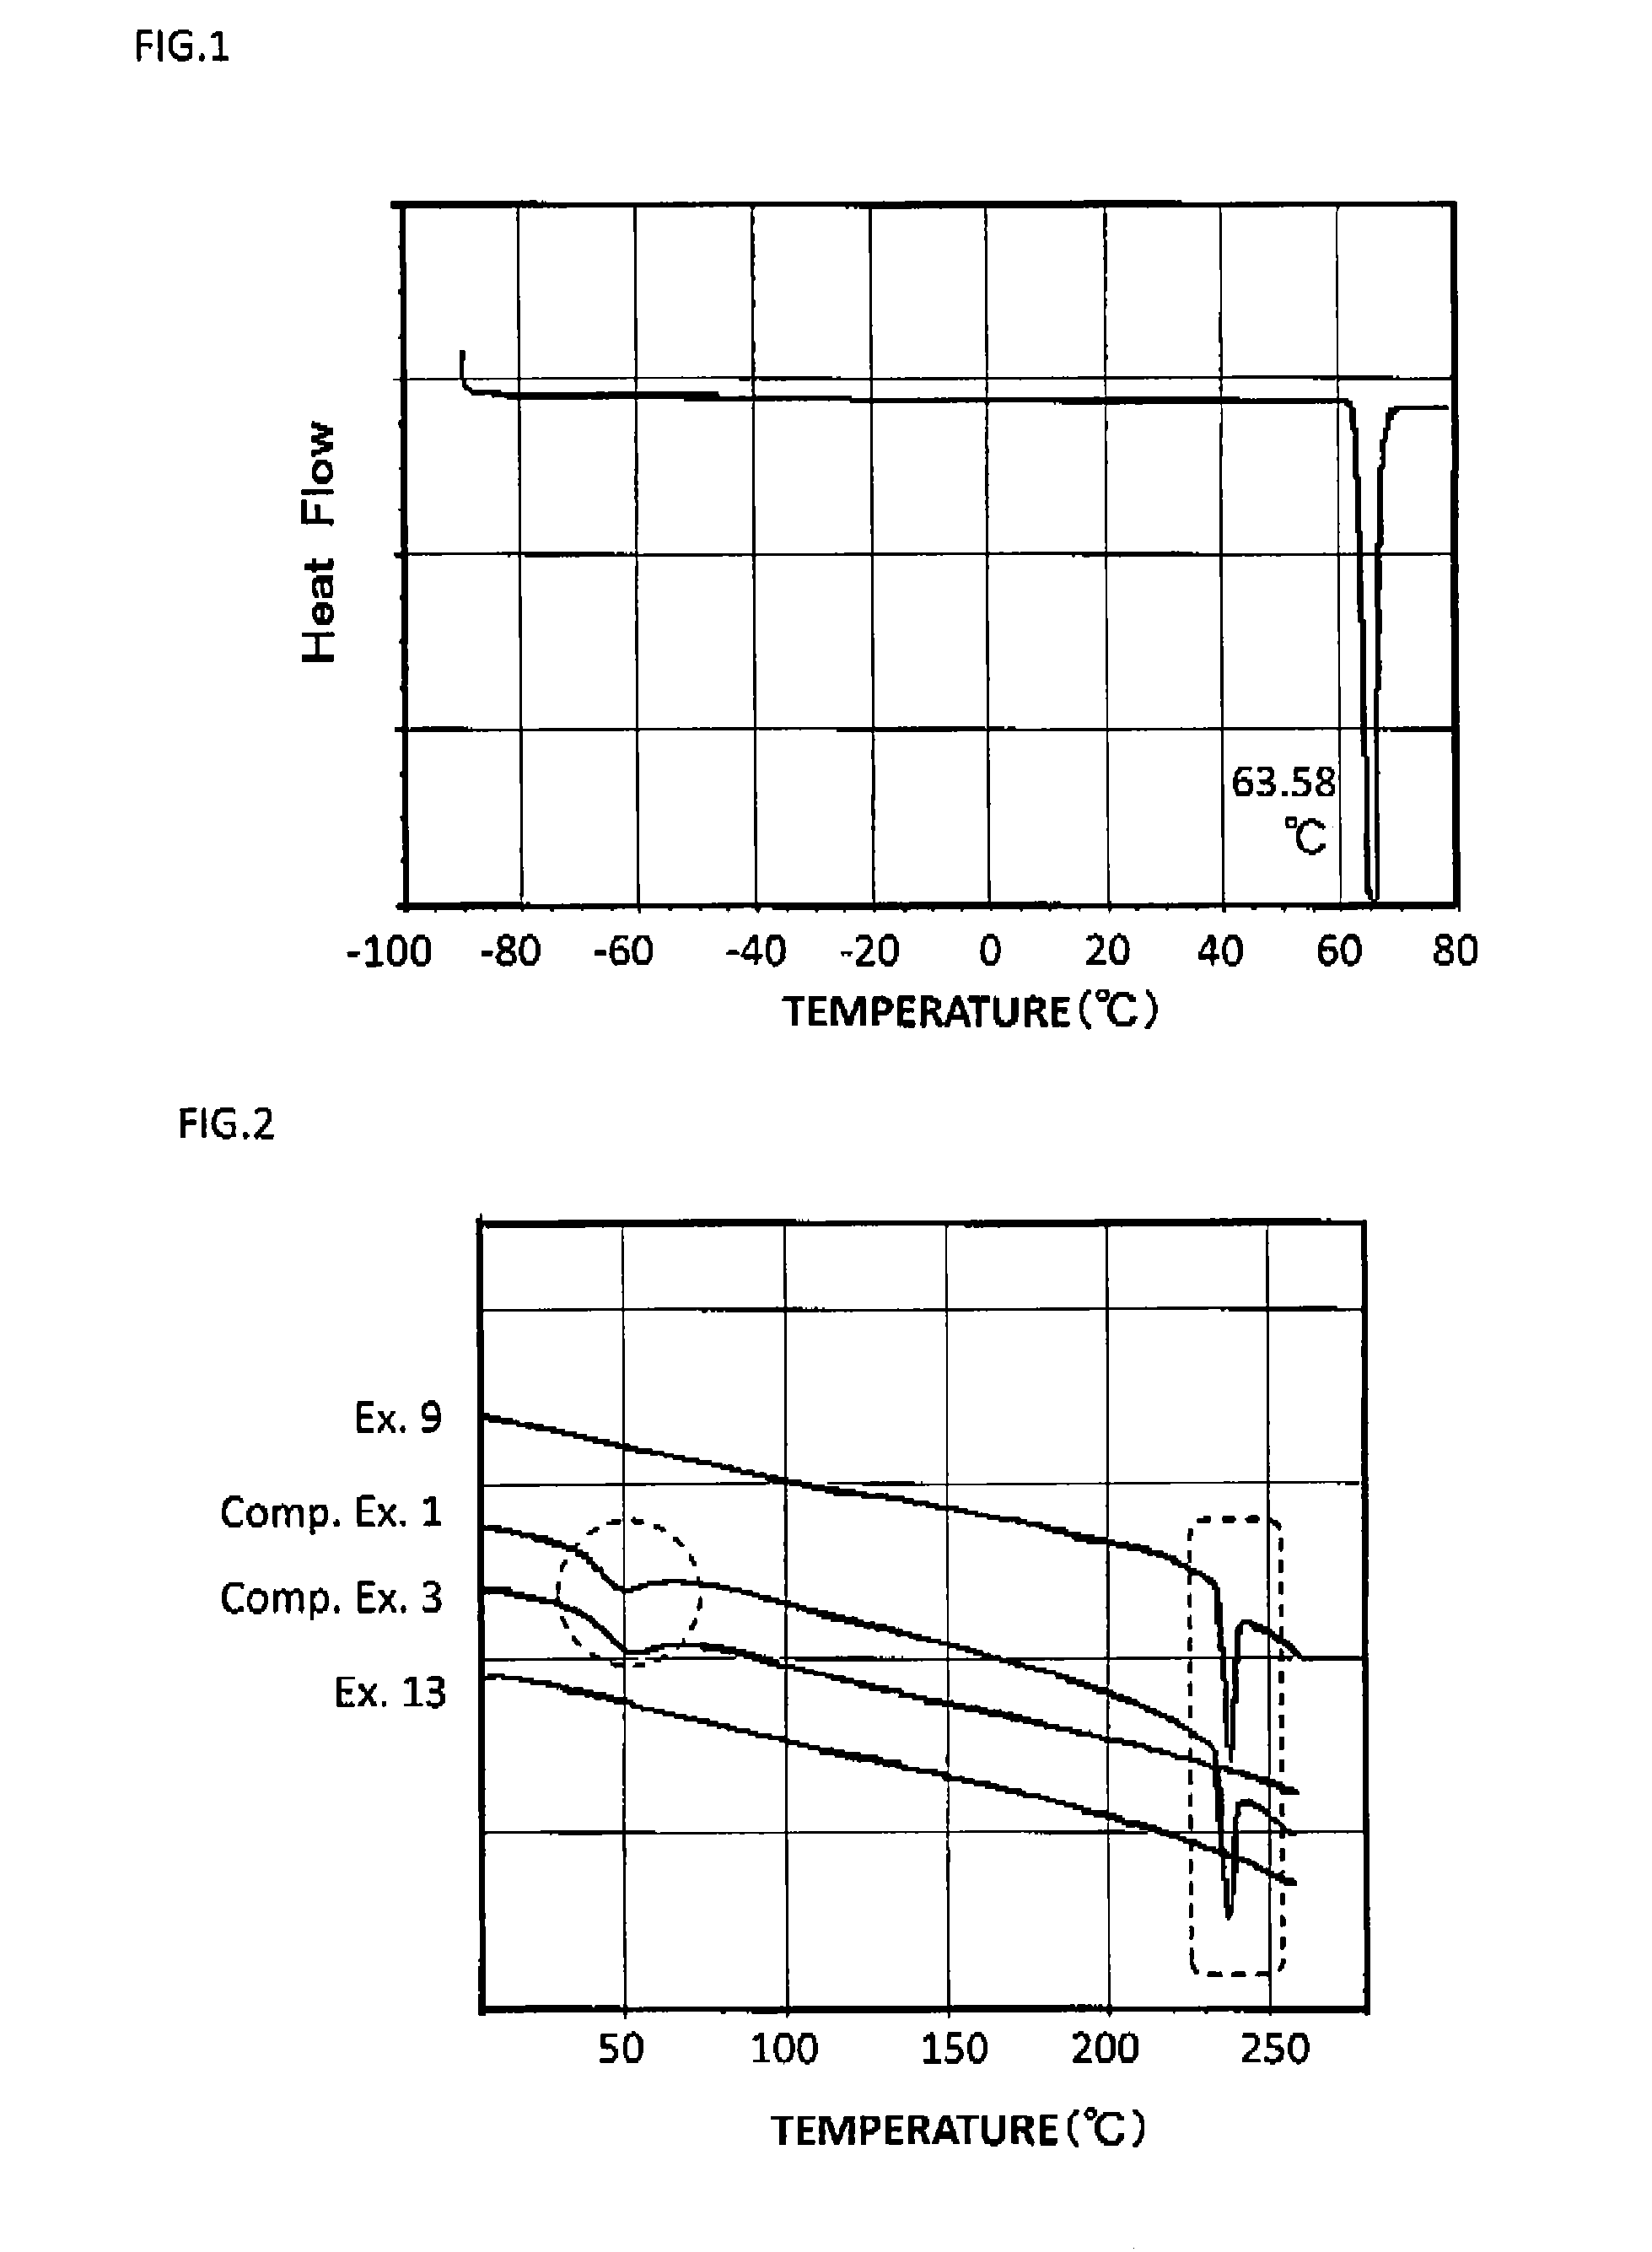 Method for producing patch, patch and package